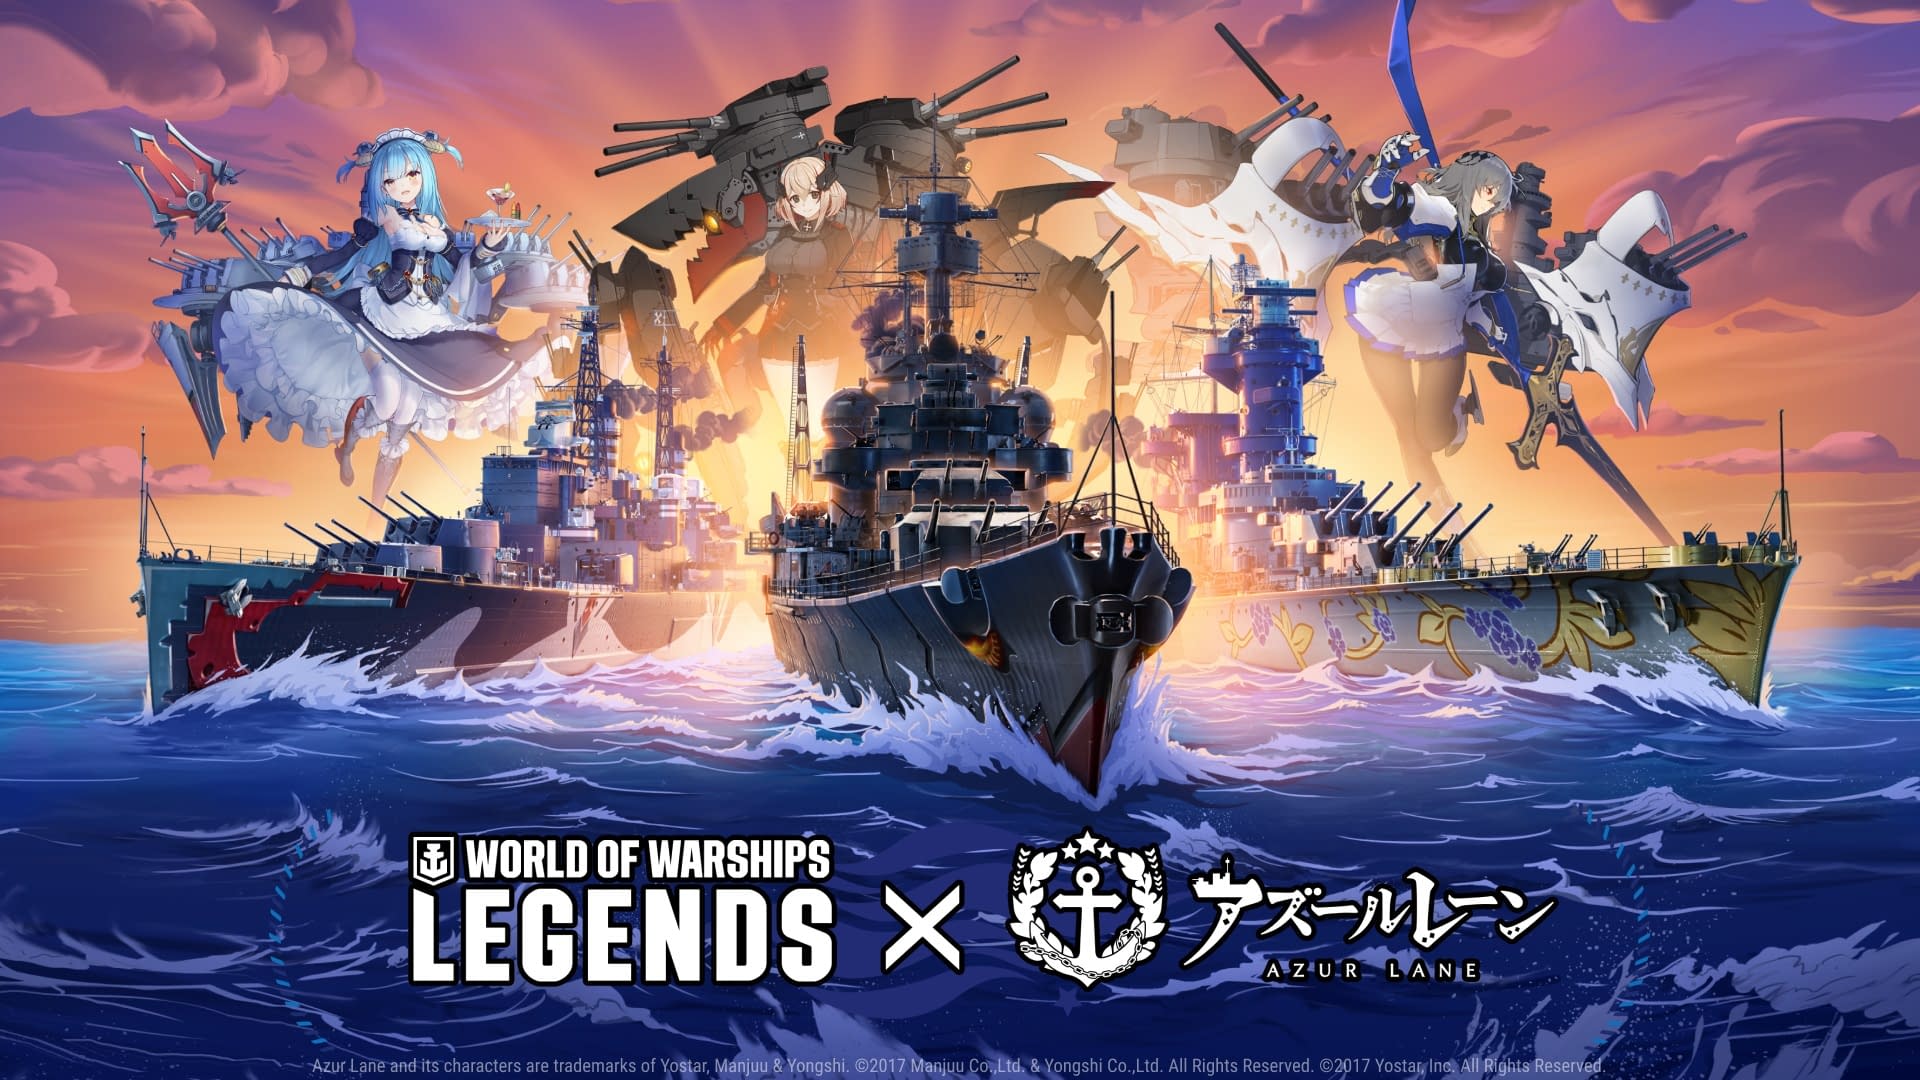 World Of Warships Legends Brings In Azur Lane For The Lunar New Year